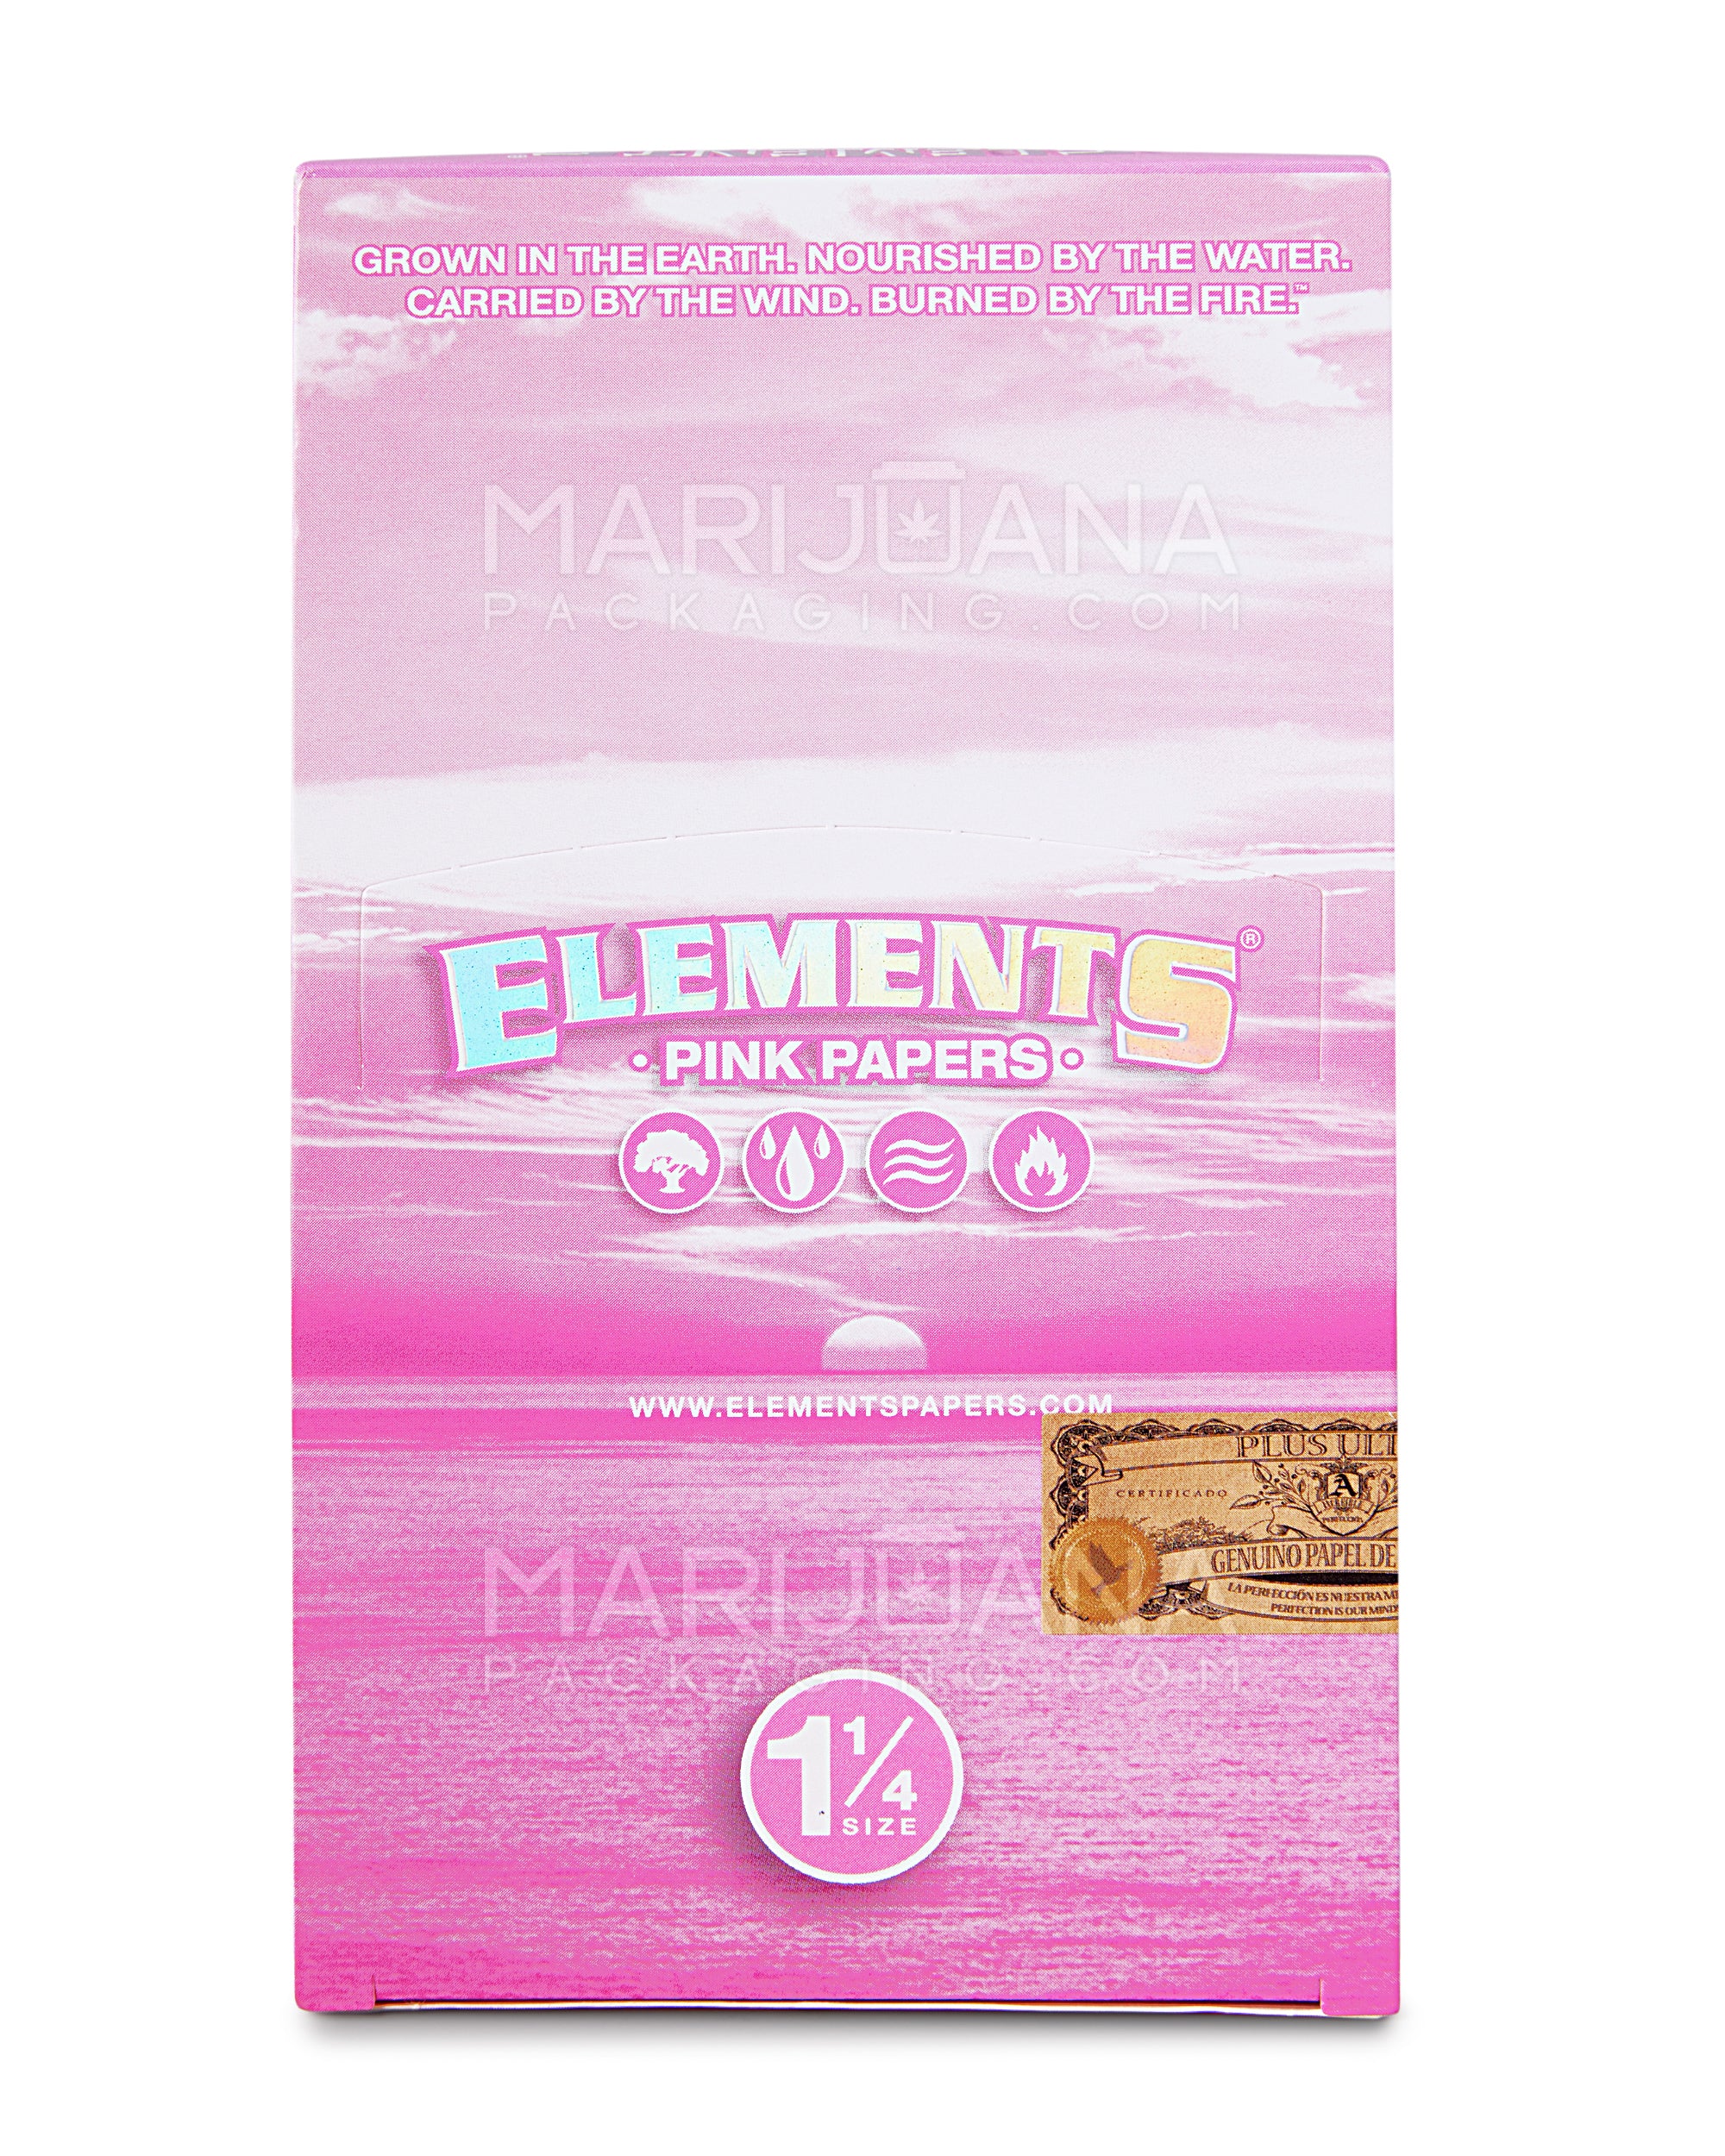 ELEMENTS | 'Retail Display' 1 1/4 Size Ultra Thin Rolling Papers | 83mm - Pink Rice Paper - 50 Count - 4